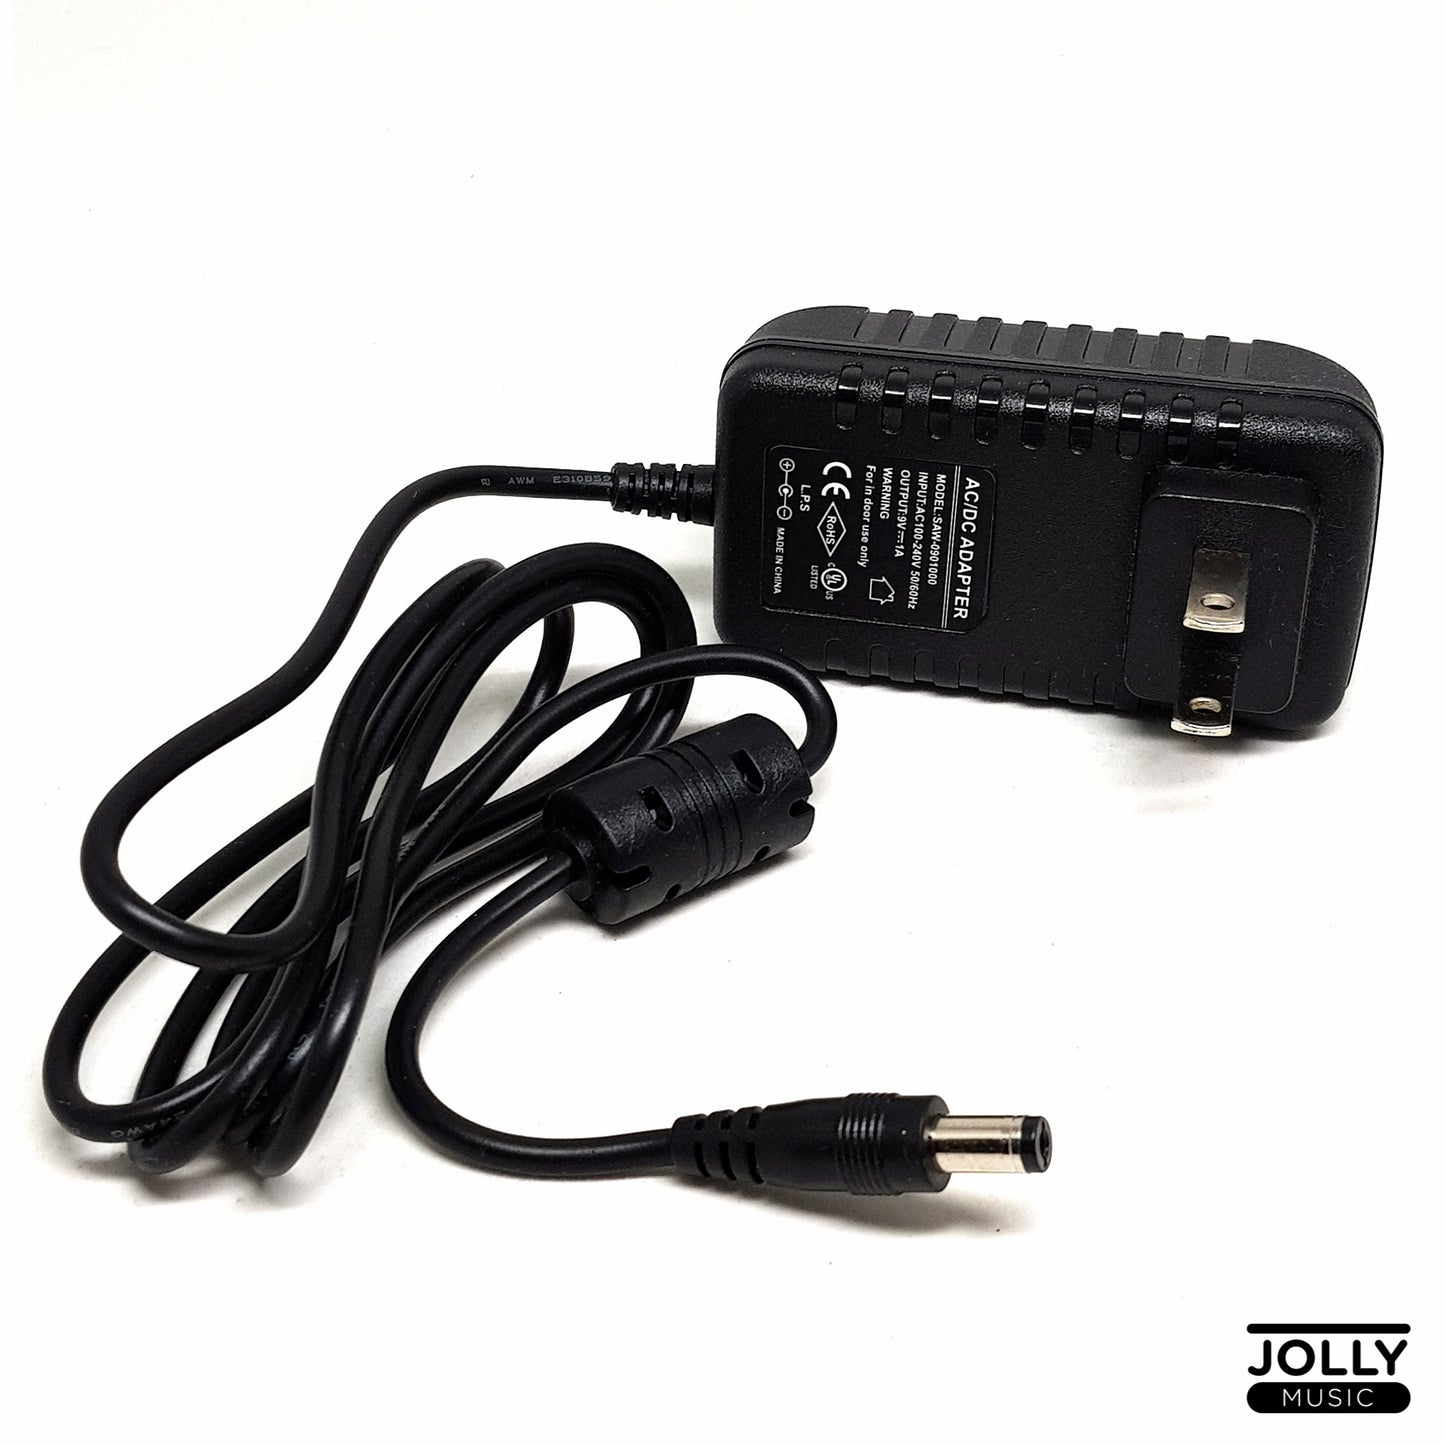 Caline CP-A1 9v DC Power Adapter for Guitar Effects 1000mA